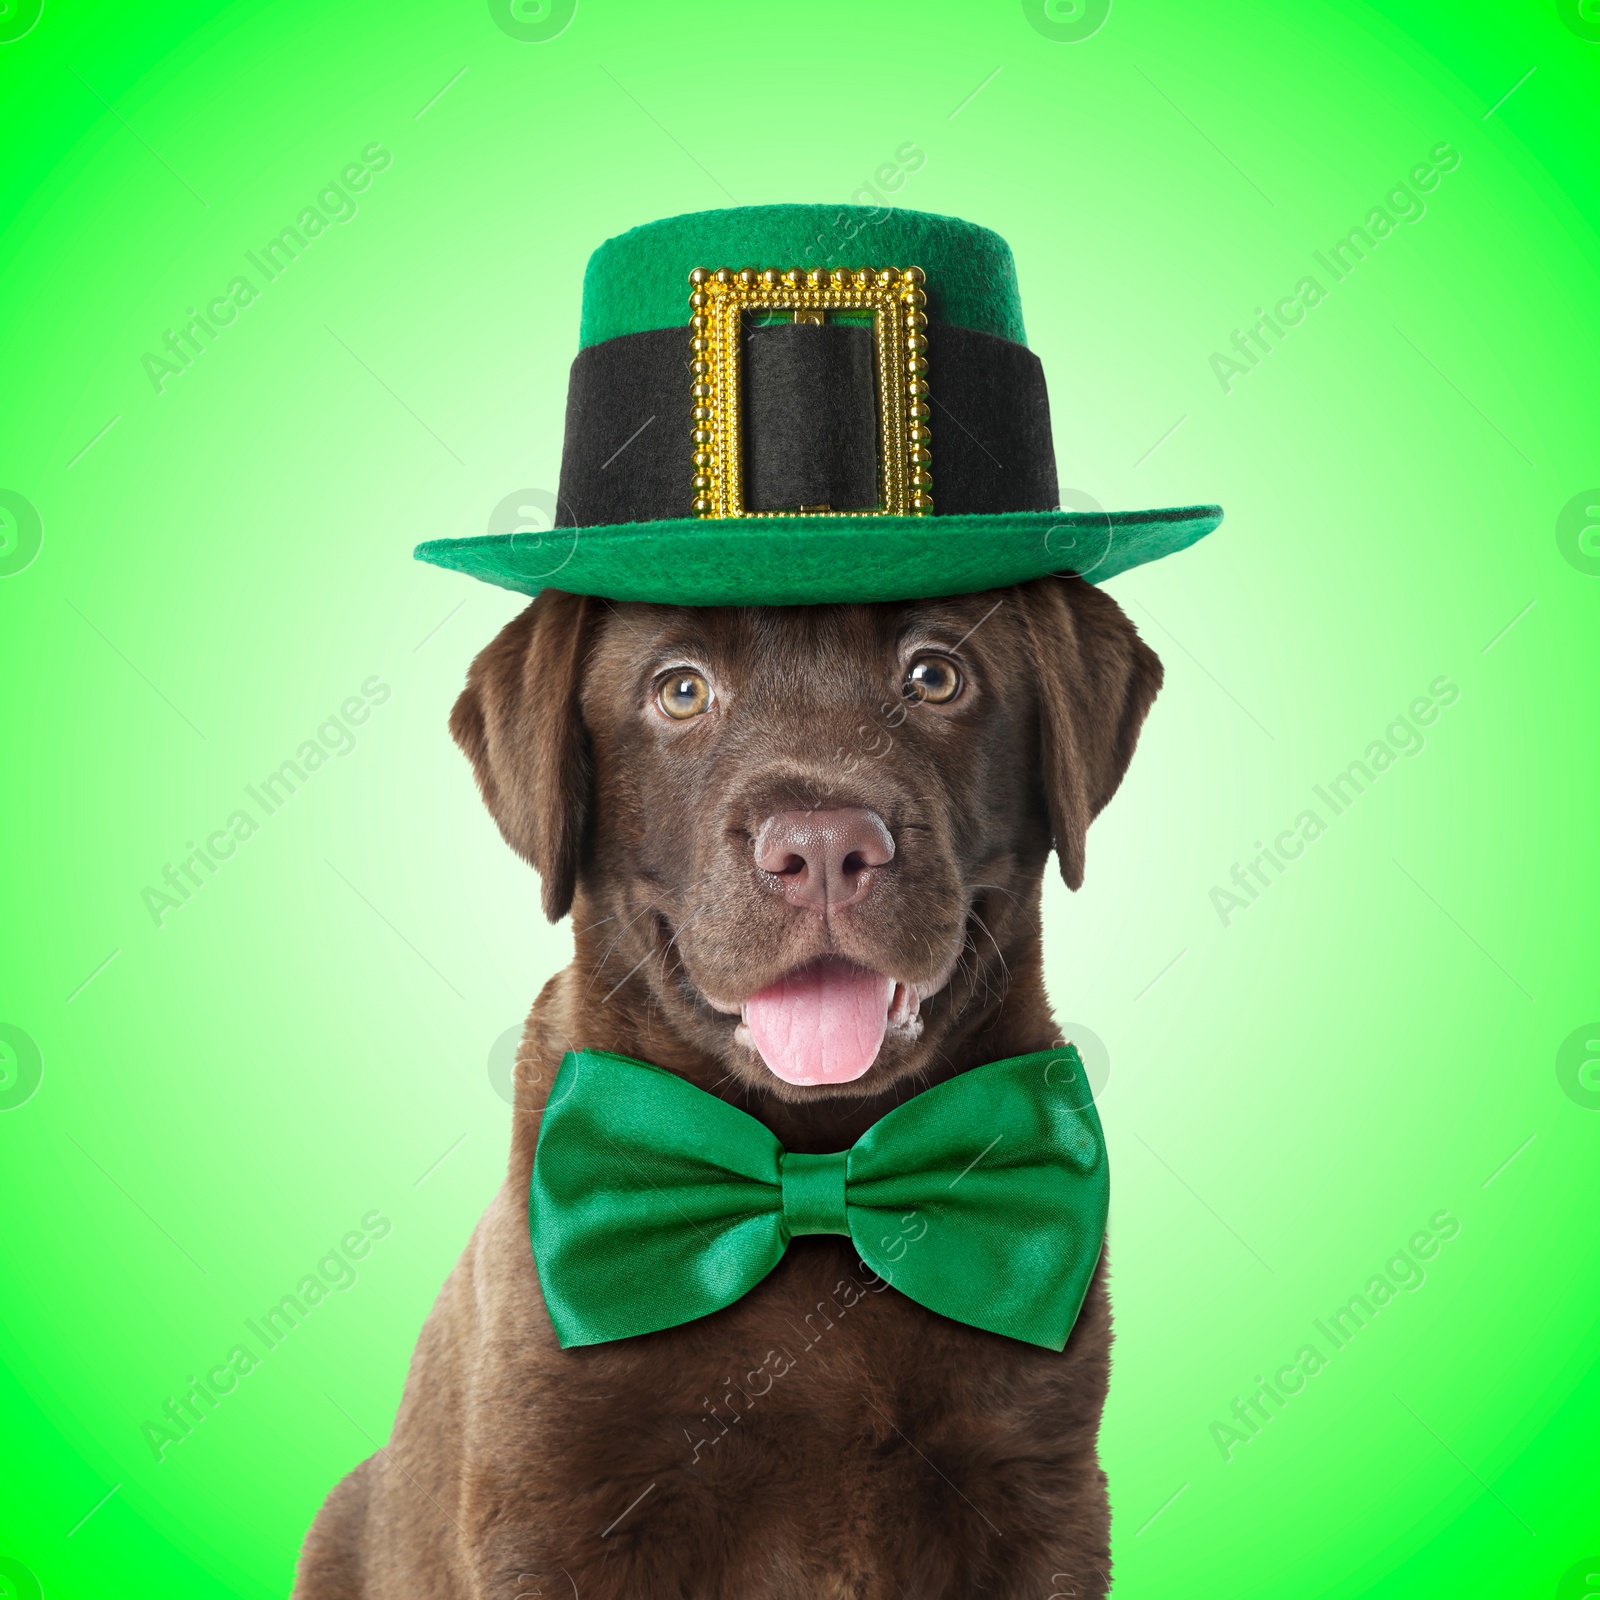 Image of St. Patrick's day celebration. Cute Chocolate Labrador puppy with leprechaun hat and bow tie on green background